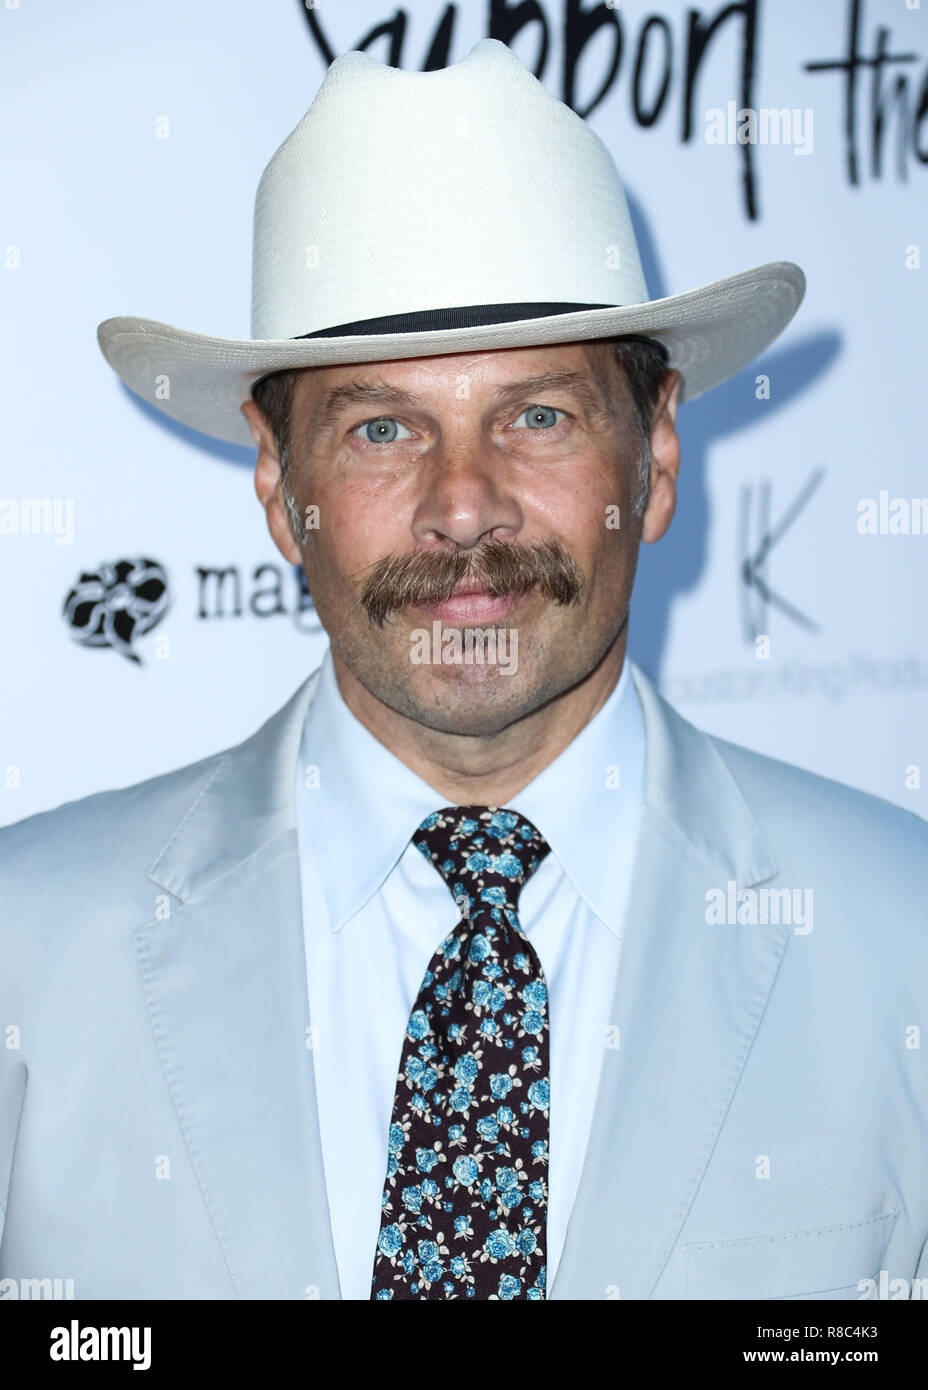 HOLLYWOOD, LOS ANGELES, CA, USA - AUGUST 22: James LeGros at the Los Angeles Premiere Of Magnolia Pictures' 'Support The Girls' held at ArcLight Hollywood on August 22, 2018 in Hollywood, Los Angeles, California, United States. (Photo by Xavier Collin/Image Press Agency) Stock Photo